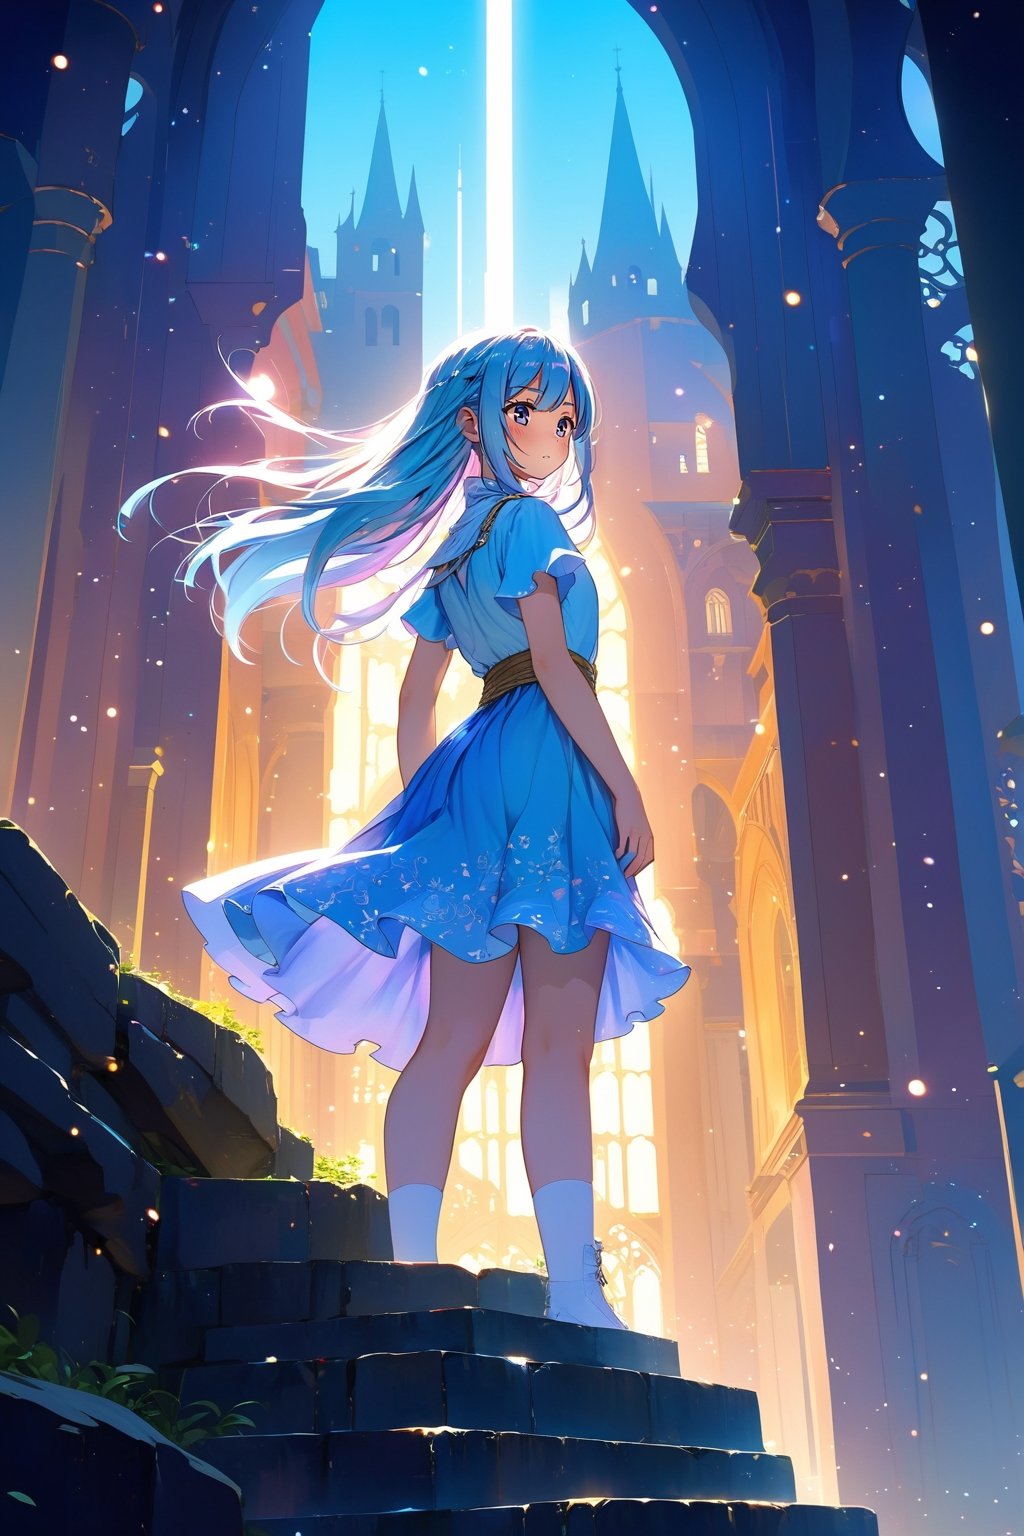 masterpiece, best quality, extremely detailed, (illustration, official art:1.1), 1 girl ,(((( light blue long hair)))), light blue hair, ,10 years old, long hair ((blush)) , cute face, big eyes, masterpiece, best quality,(((((a very delicate and beautiful girl))))),Amazing,beautiful detailed eyes,blunt bangs((((little delicate girl)))),tareme(true beautiful:1.2), sense of depth,dynamic angle,affectionate smile, (true beautiful:1.2),,(tiny 1girl model:1.2),(flat chest)), 
Soft Focus , (Masterpiece, top quality, super detailed CG, ultra detailed beautiful face and eyes,super detailed, intricate details:1.2), 8k wallpapers, elaborate features,
(1 person, solo:1.4)perfect cartoon illustration,(1 person, solo:1.4)
(realistic textures:0.8), high res, cute, (vivid colors, dynamic lighting:1.0), (high contrast:0.8),
A girl (in her teens) with a mysterious atmosphere overlooking the lowlands from the top of a steep cliff, very pretty face, long glossy blue hair, clear sky-blue eyes, clear skin, slender arms and legs (both barefoot), wearing only a white dress that reaches down to her calves, surrounded by blue phosphorescence. Blue phosphorescence surrounds her, ruins spread far and wide in front of her, the place is a fantastic and vast urban ruin, the time is night and the area is dark, but stars and a big moon are shining brightly in the sky, back view, so that her whole body is included in the illustration.,Human bones,prison,,Brilliant and colorful paintings、Grasp the great sword with 、Holding the Great Sword、（church、HighestQuali,astonishing detail：1.25）,,Brilliant and colorful paintings,Wielding the legendary sword、(((+++Black mist clinging to the body))))],Most Beautiful Form of Chaos、,holding a sword,glowing sword,Architectural100